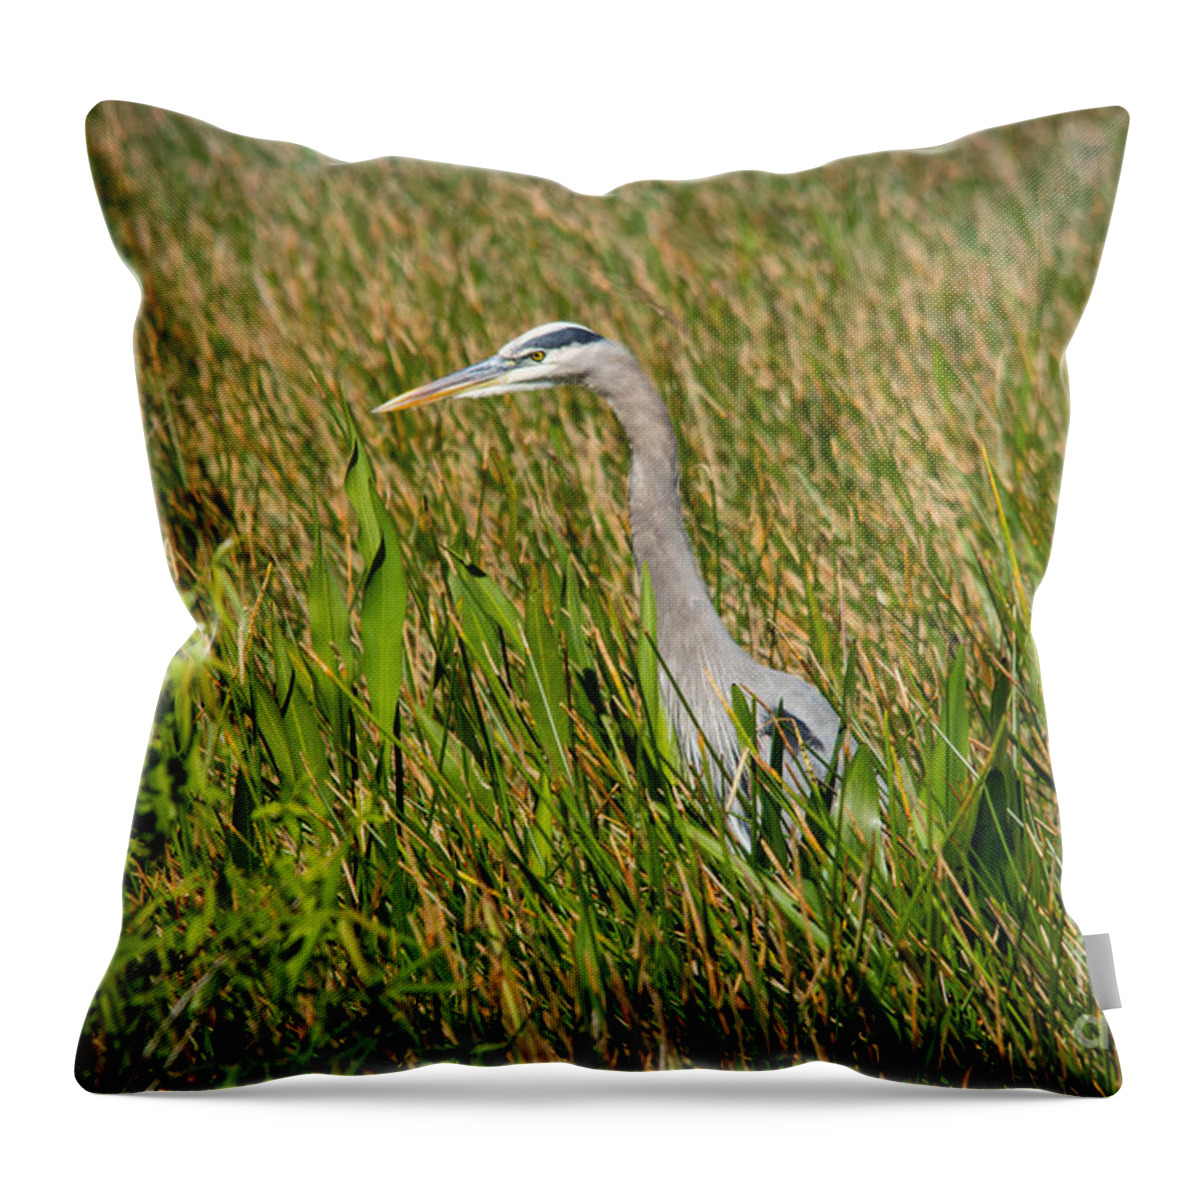 America Throw Pillow featuring the photograph Blue Heron by Amanda Mohler